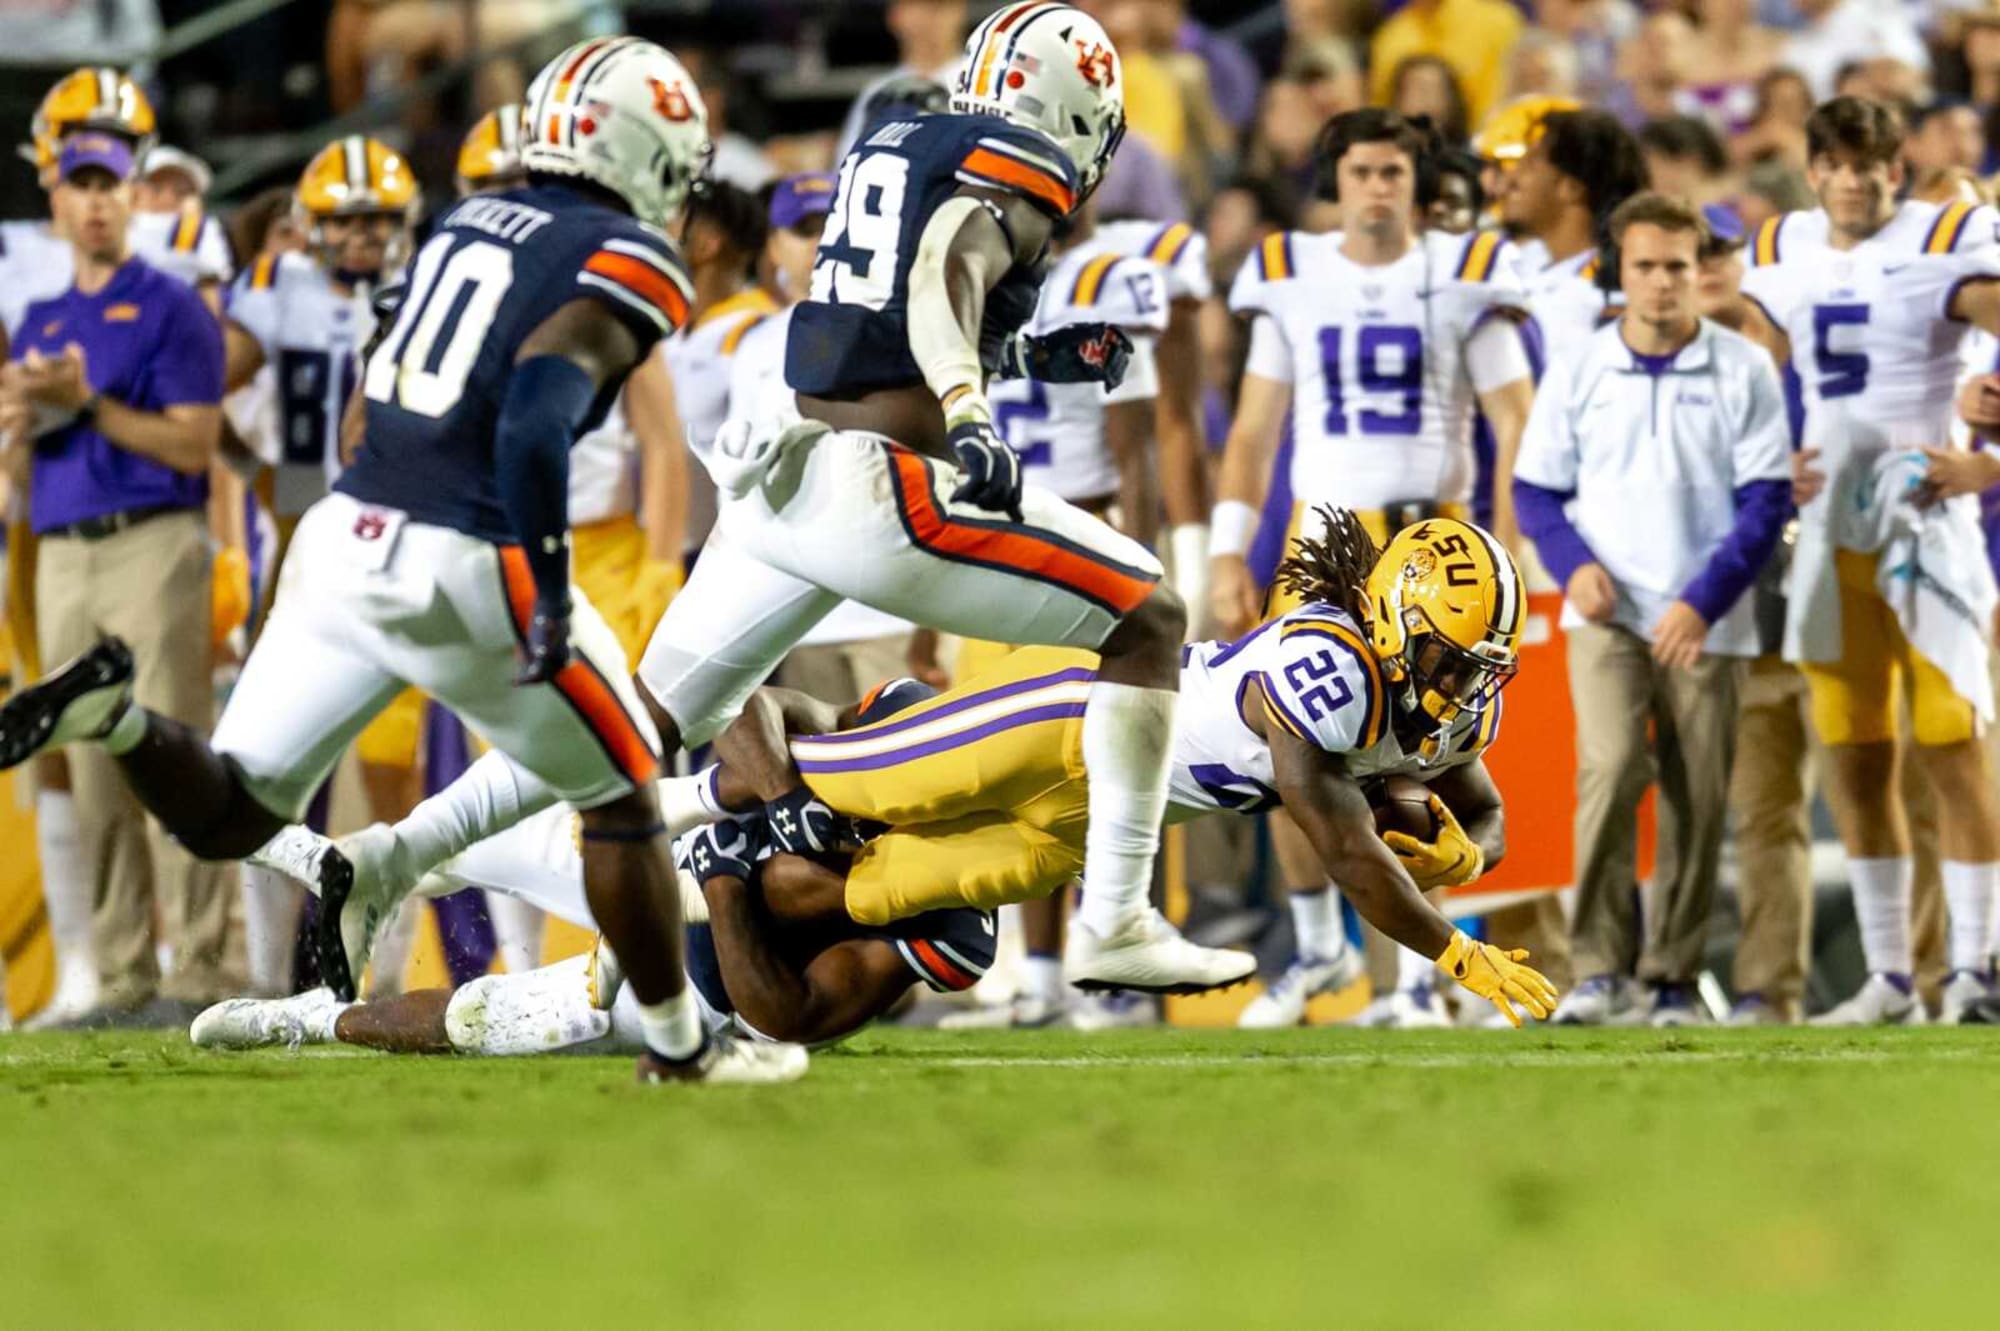 The LSU-Auburn football Week 5 odds have wildly shifted